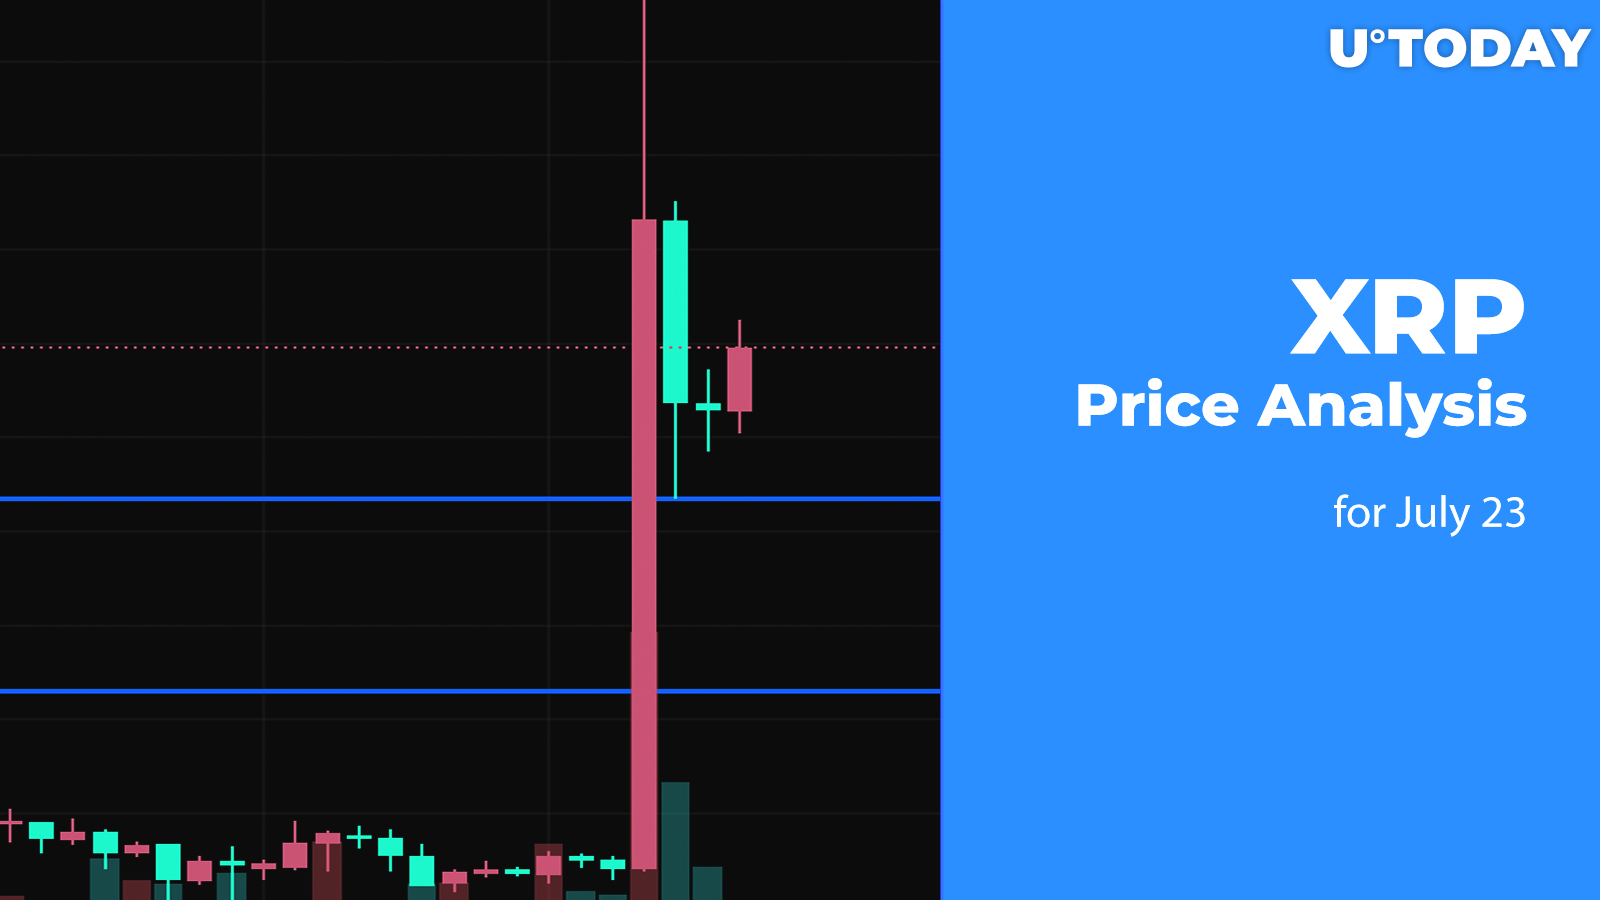 XRP Price Analysis for July 23